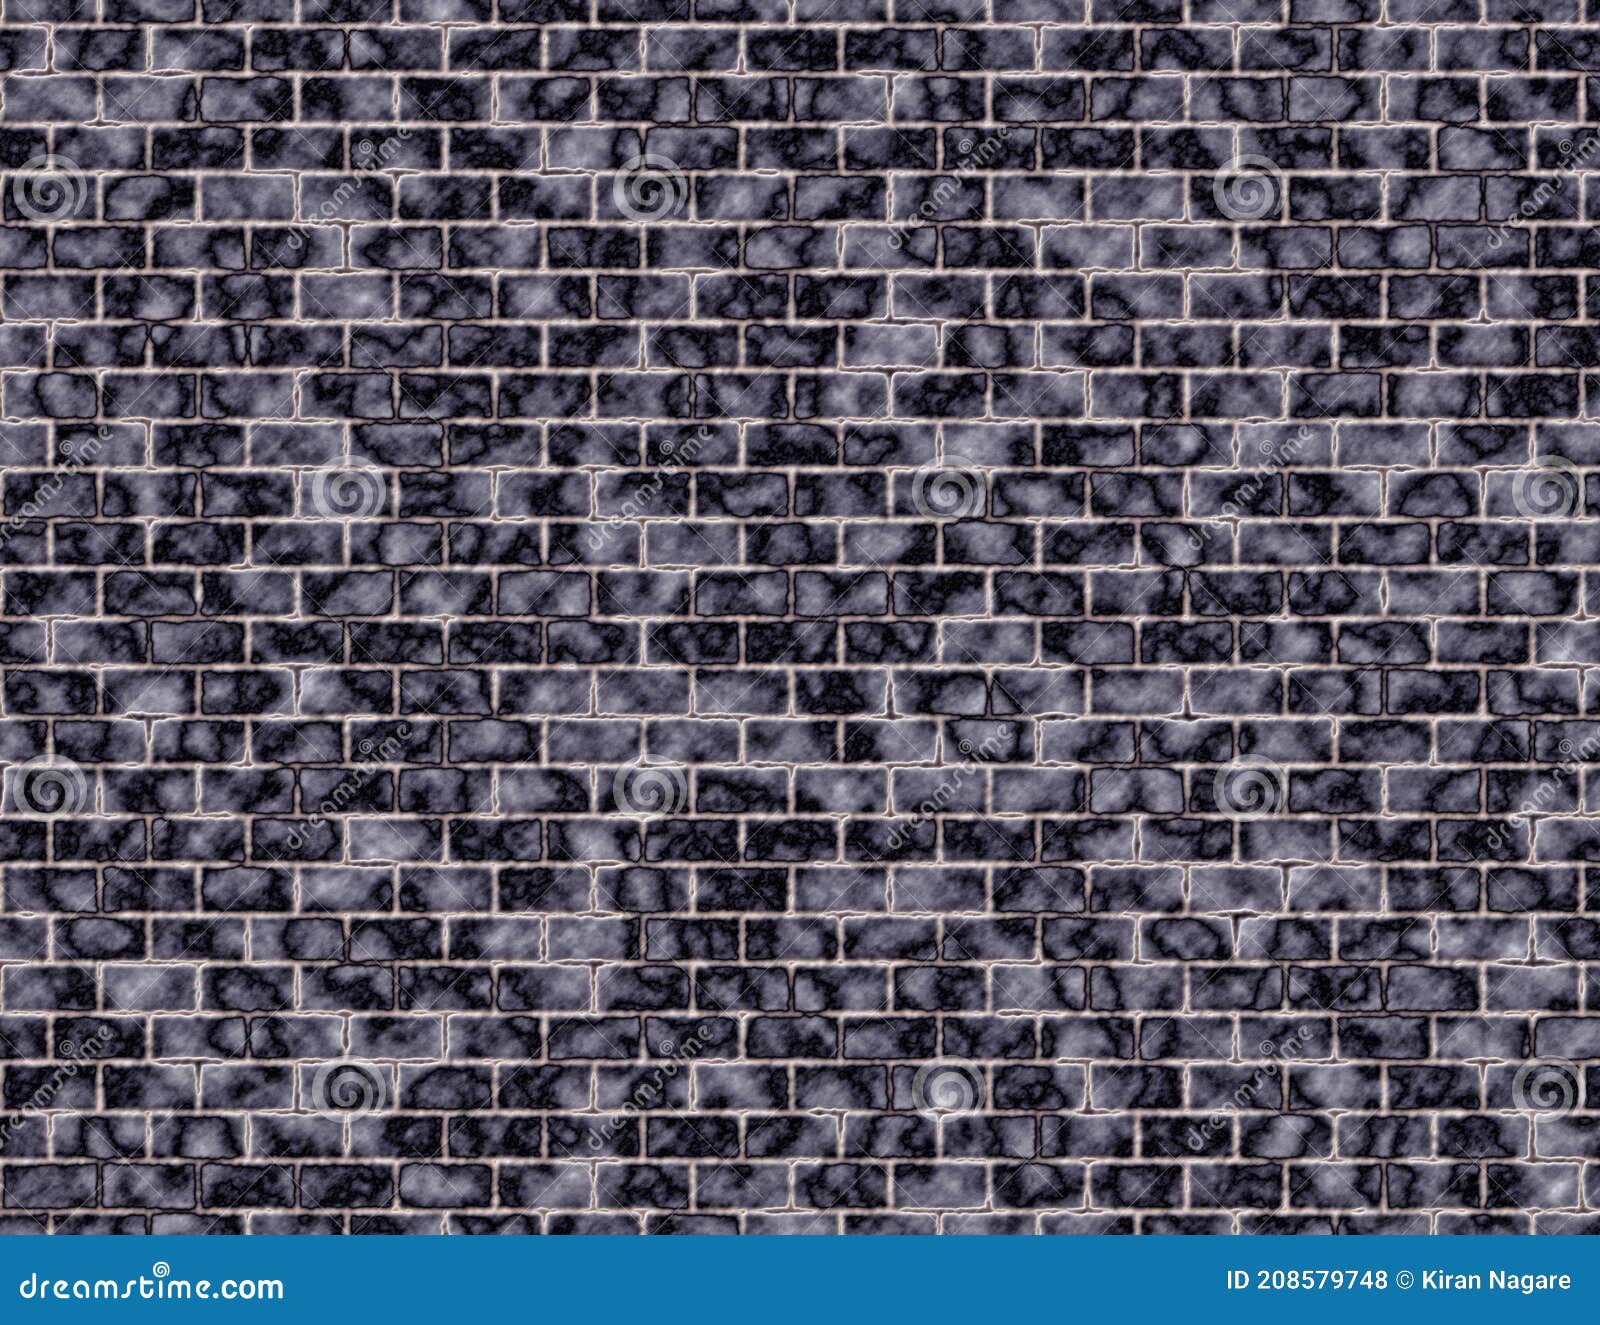 Brick Wall Texture Background Hd Stock Illustration - Illustration of  brick, background: 208579748